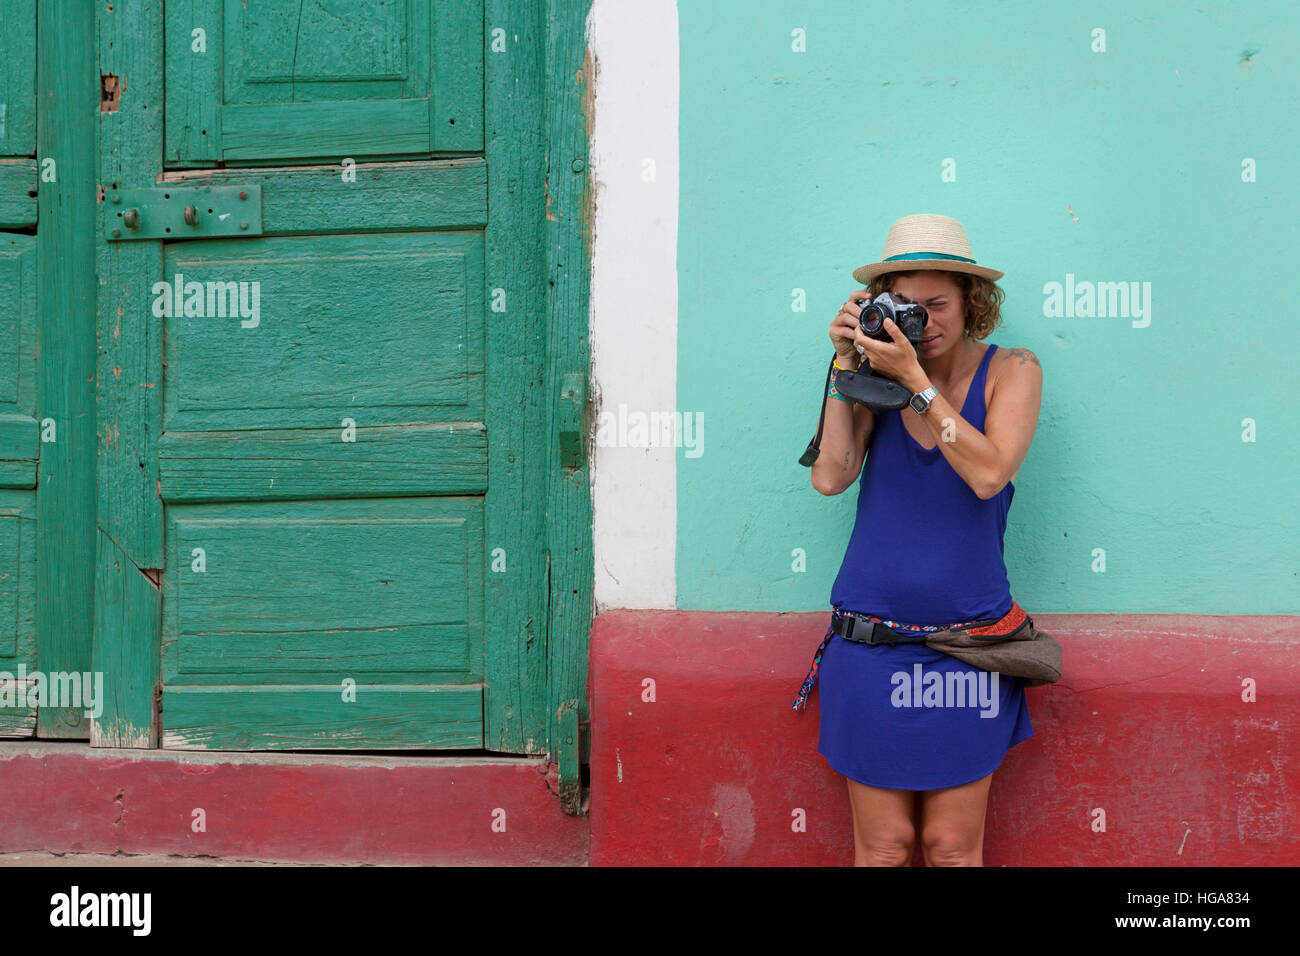 Girl tourist on her 20 30 years old taking photo in Trinidad, Cuba Stock Photo